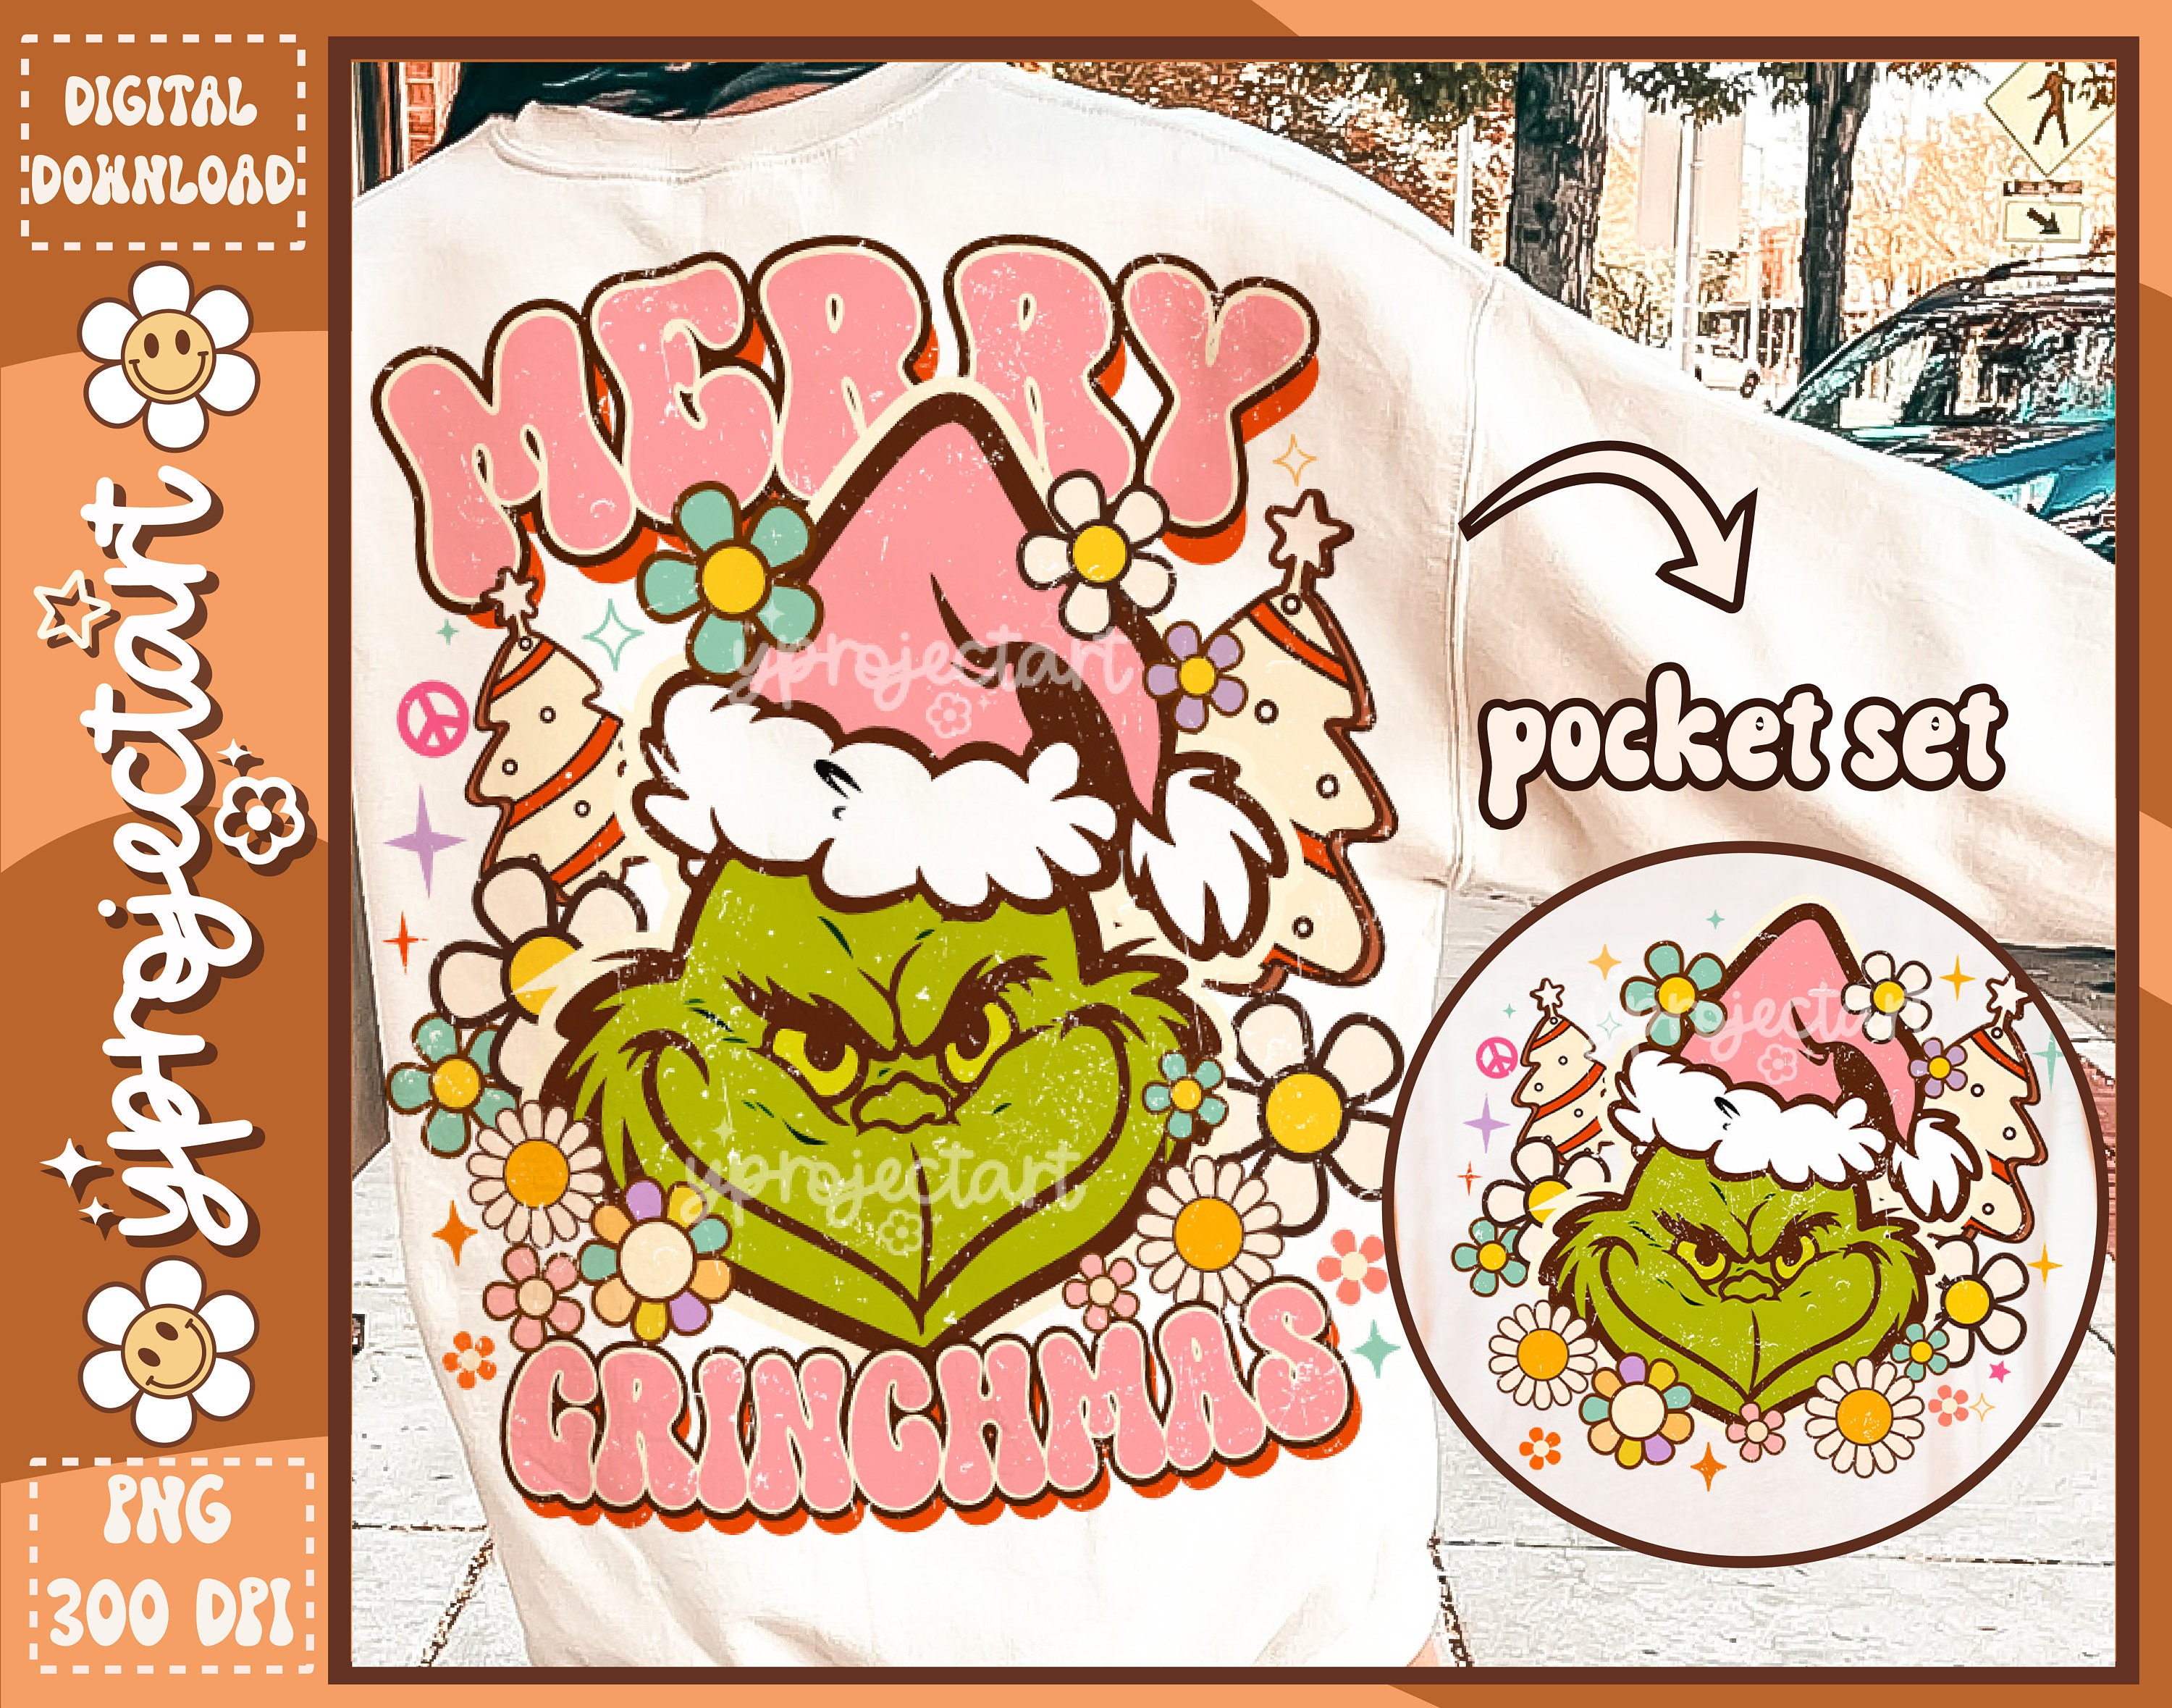 CH451 Merry Christmas The Grinch Sublimation Print — Southern